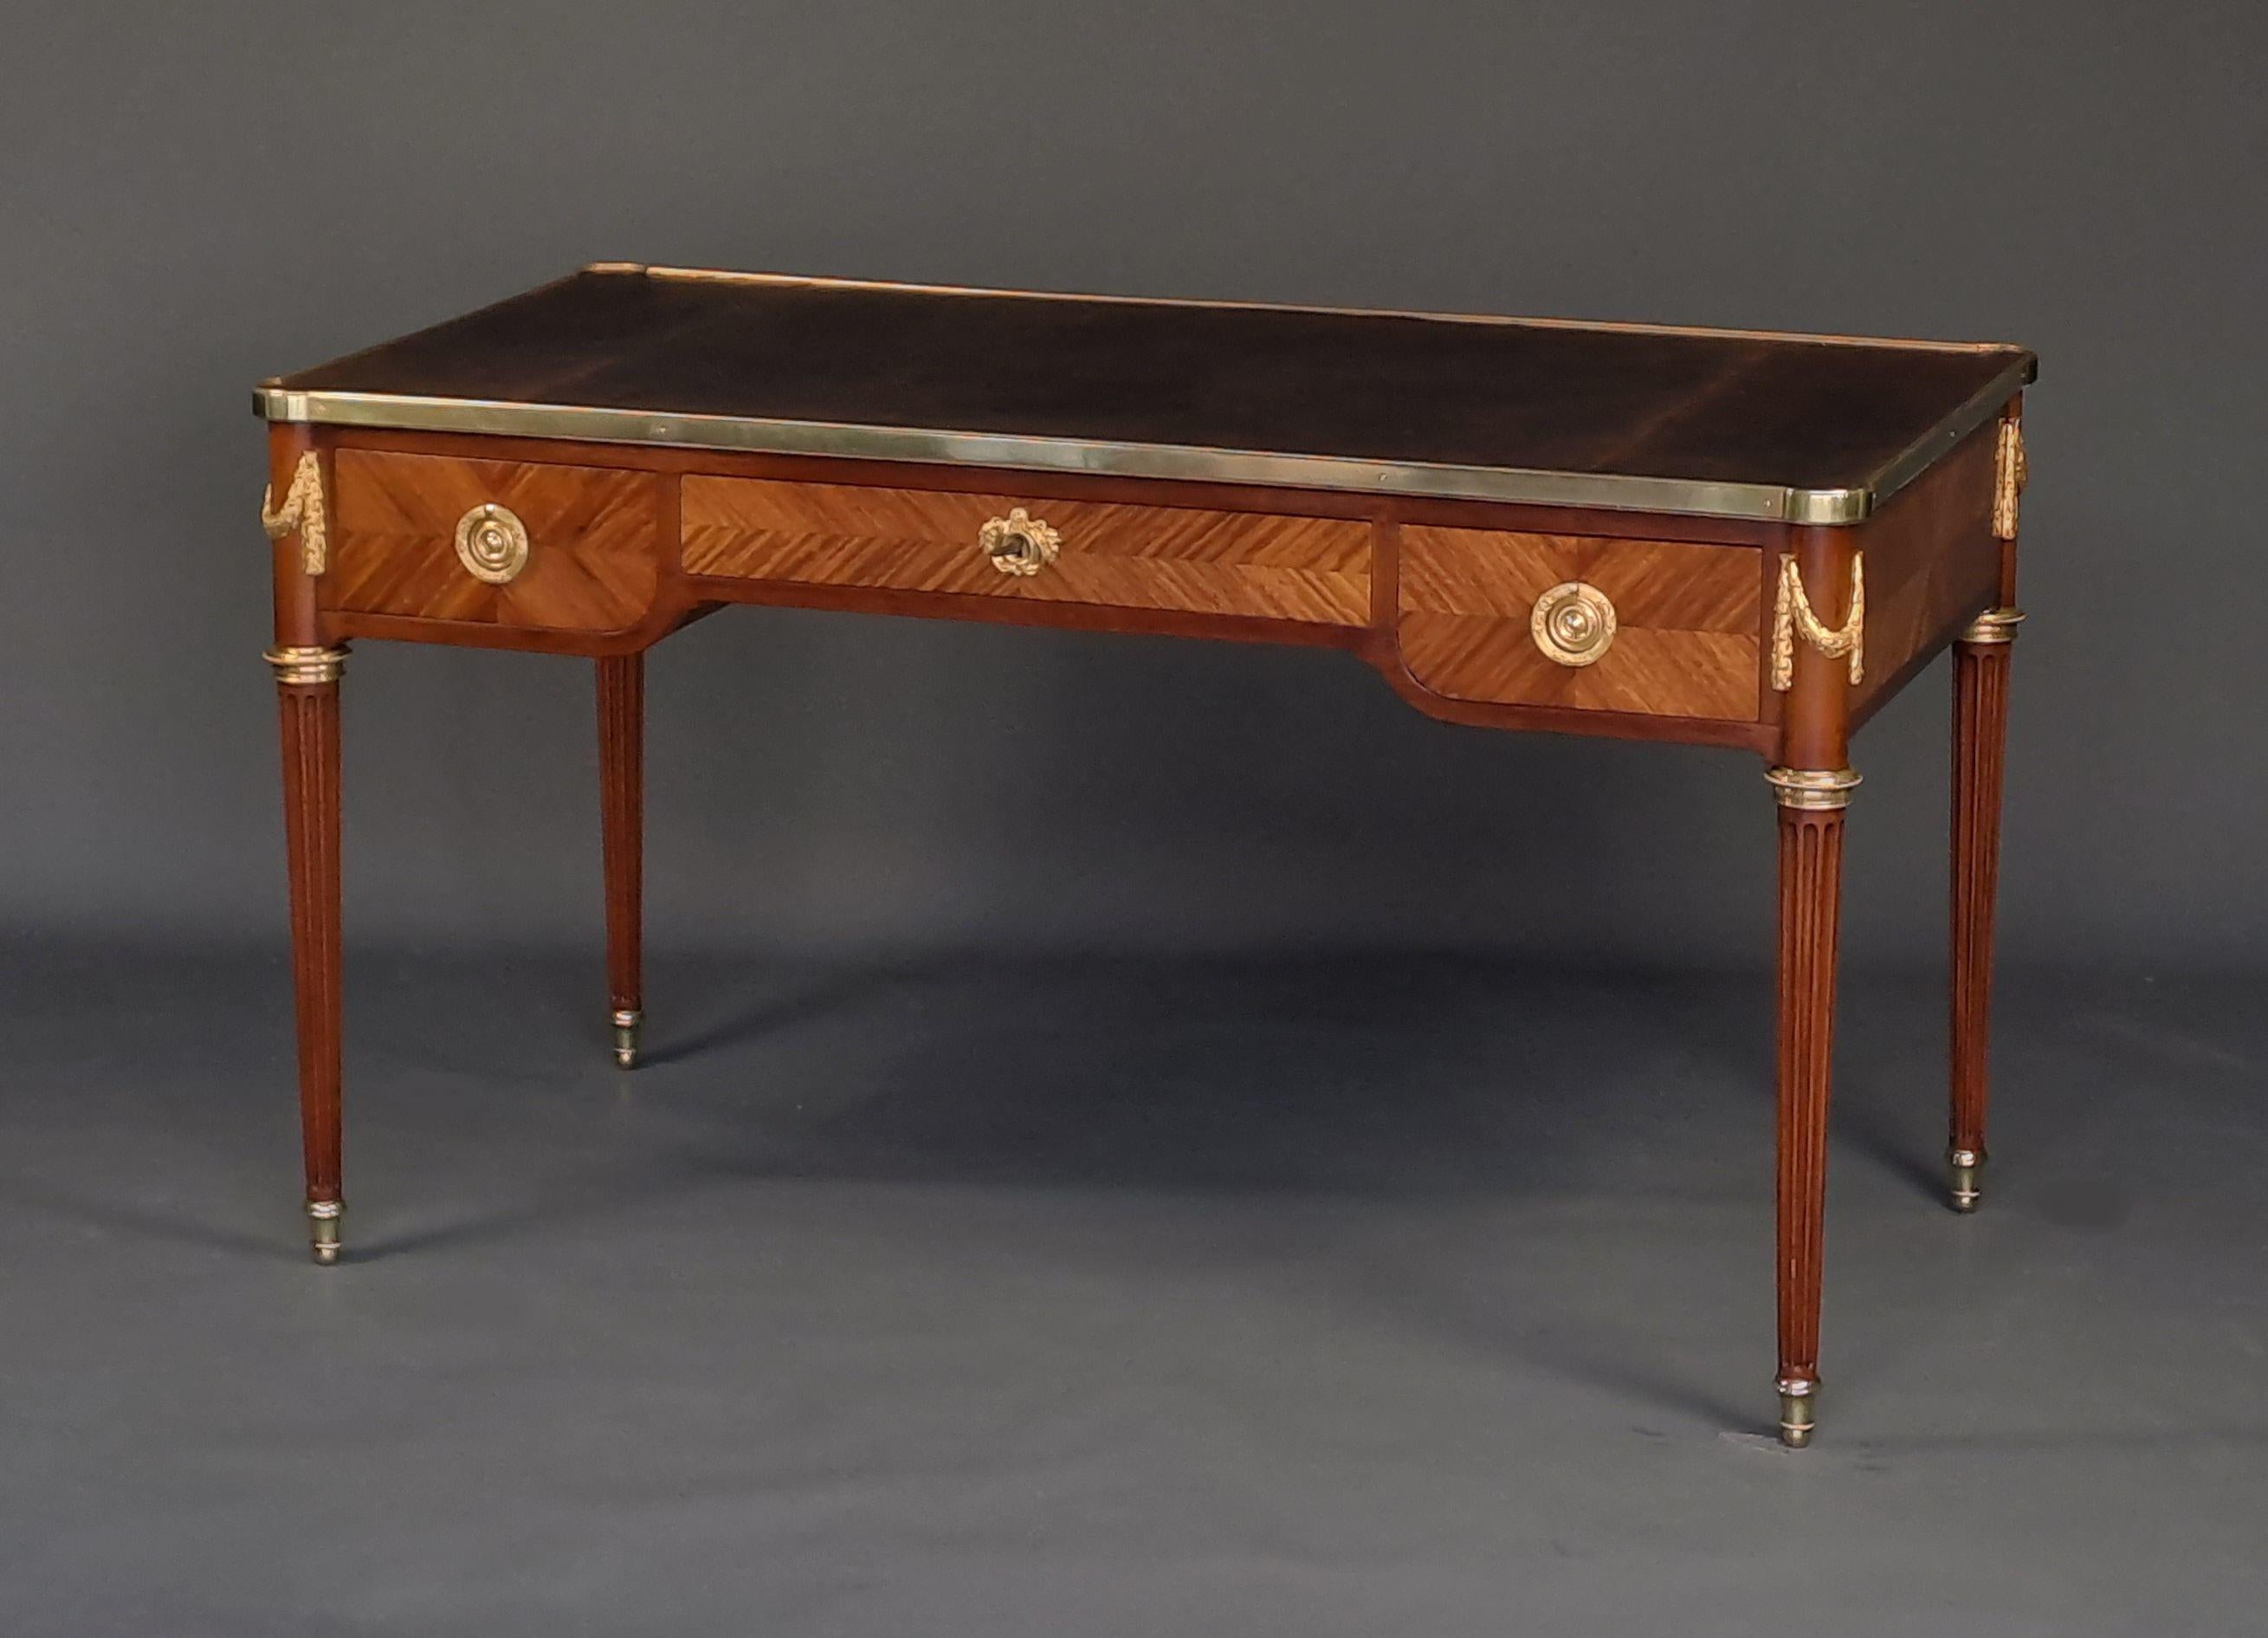 Elegant Louis XVI style Bureau Plat in mahogany and marquetry in rosewood frieze.

Beautiful ornamentation of very finely chiseled gilt bronze.

Moroccan leather top surrounded by a gilt bronze ingot mold.

Opening three drawers in